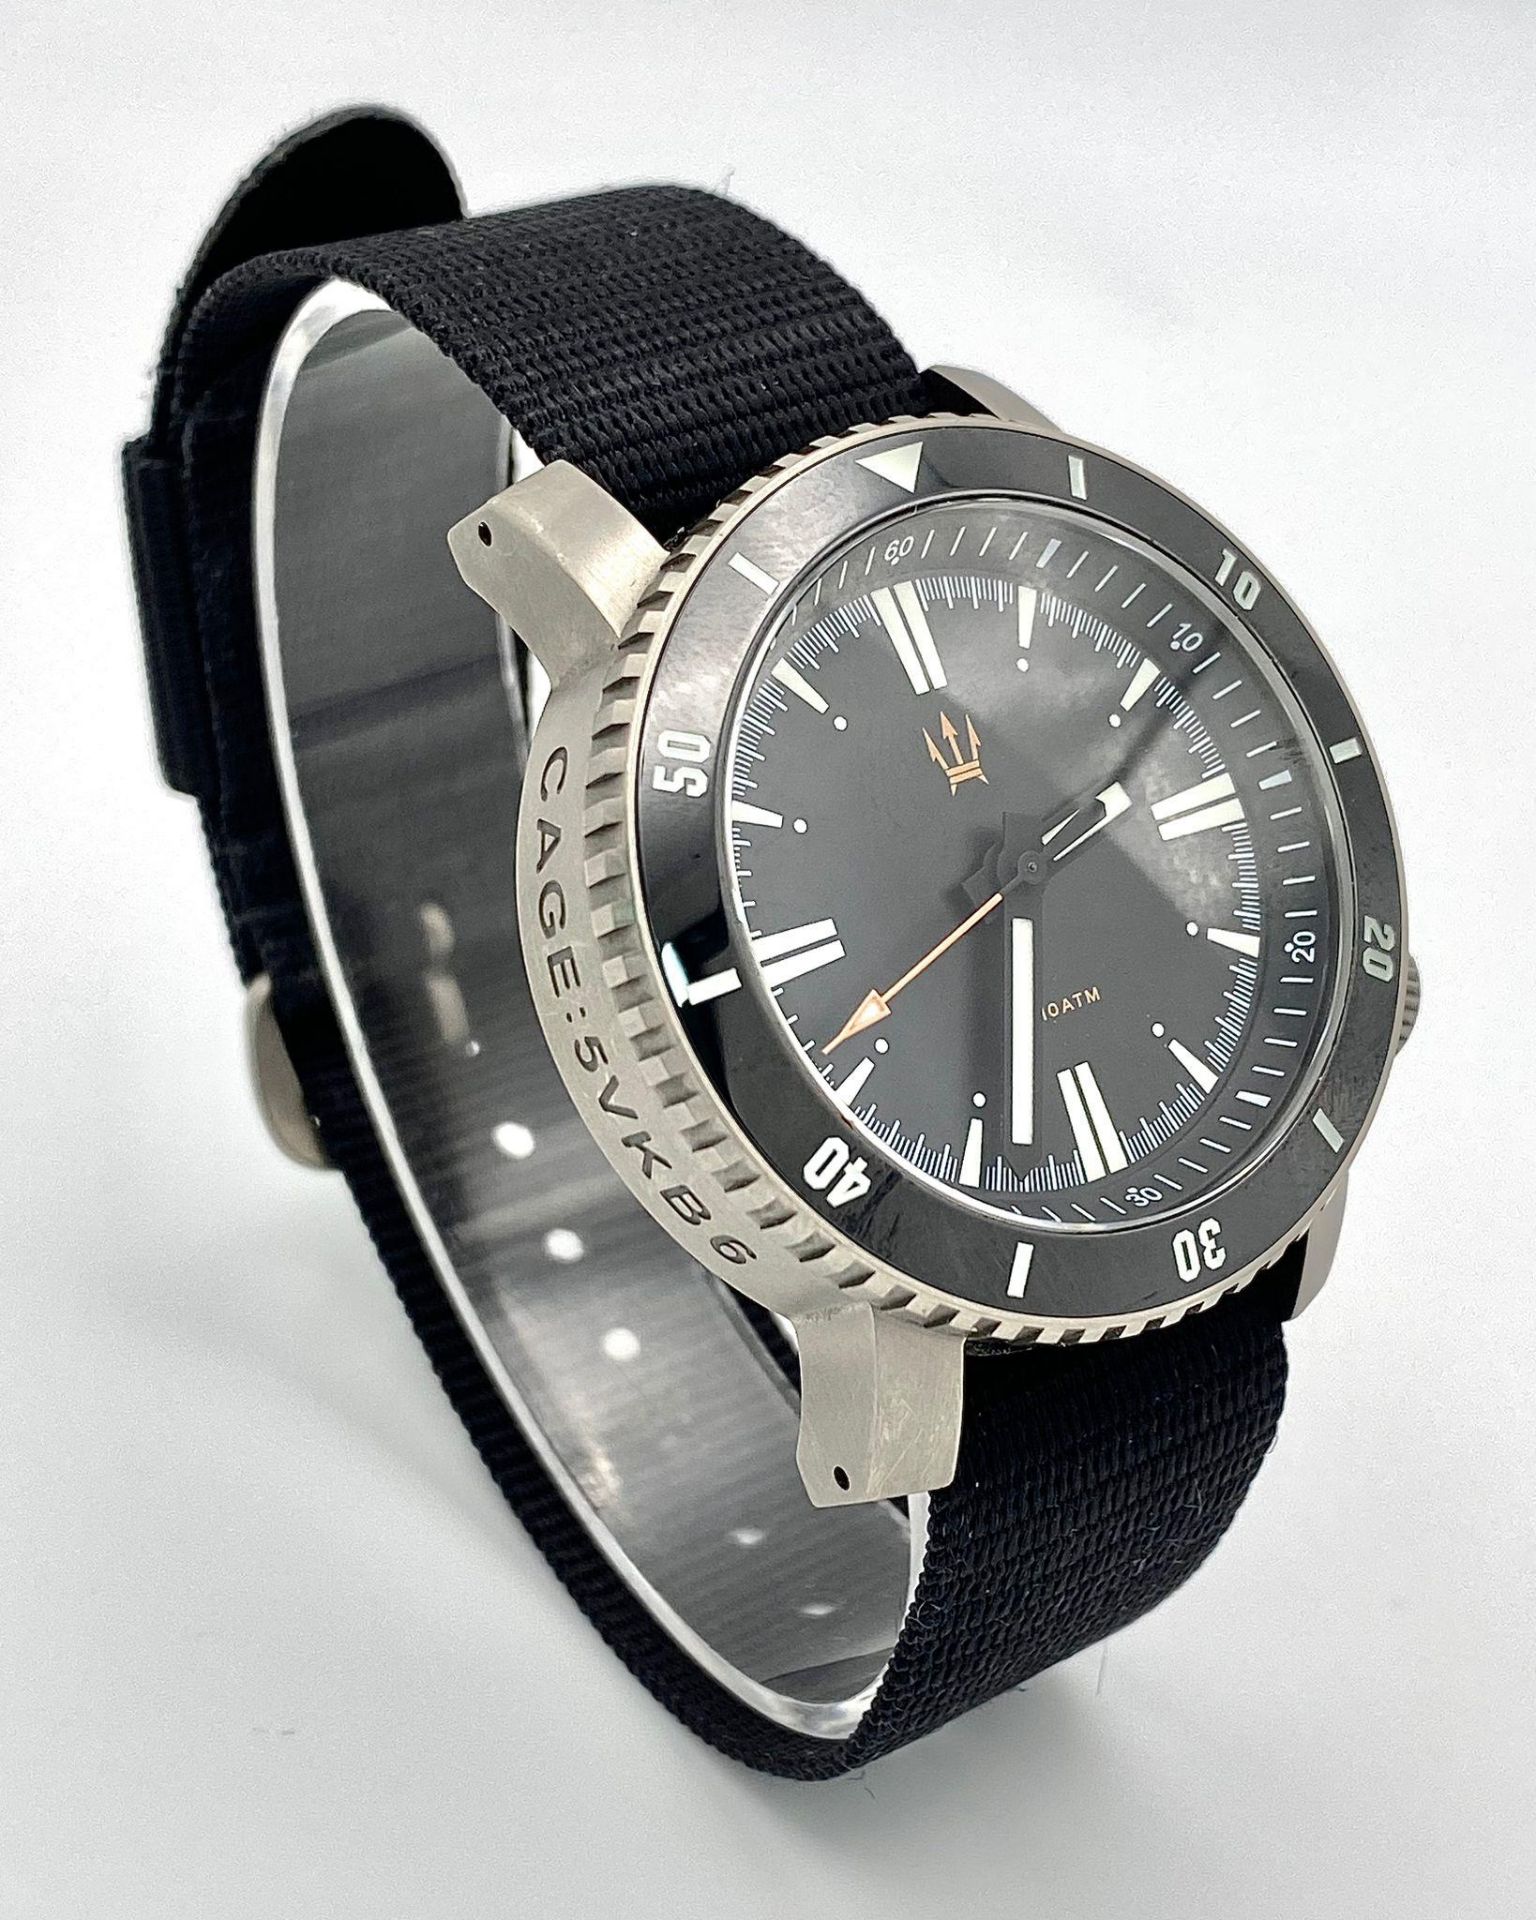 An Excellent Condition, Limited Edition, Military Specification, Automatic Divers Watch by - Image 3 of 7